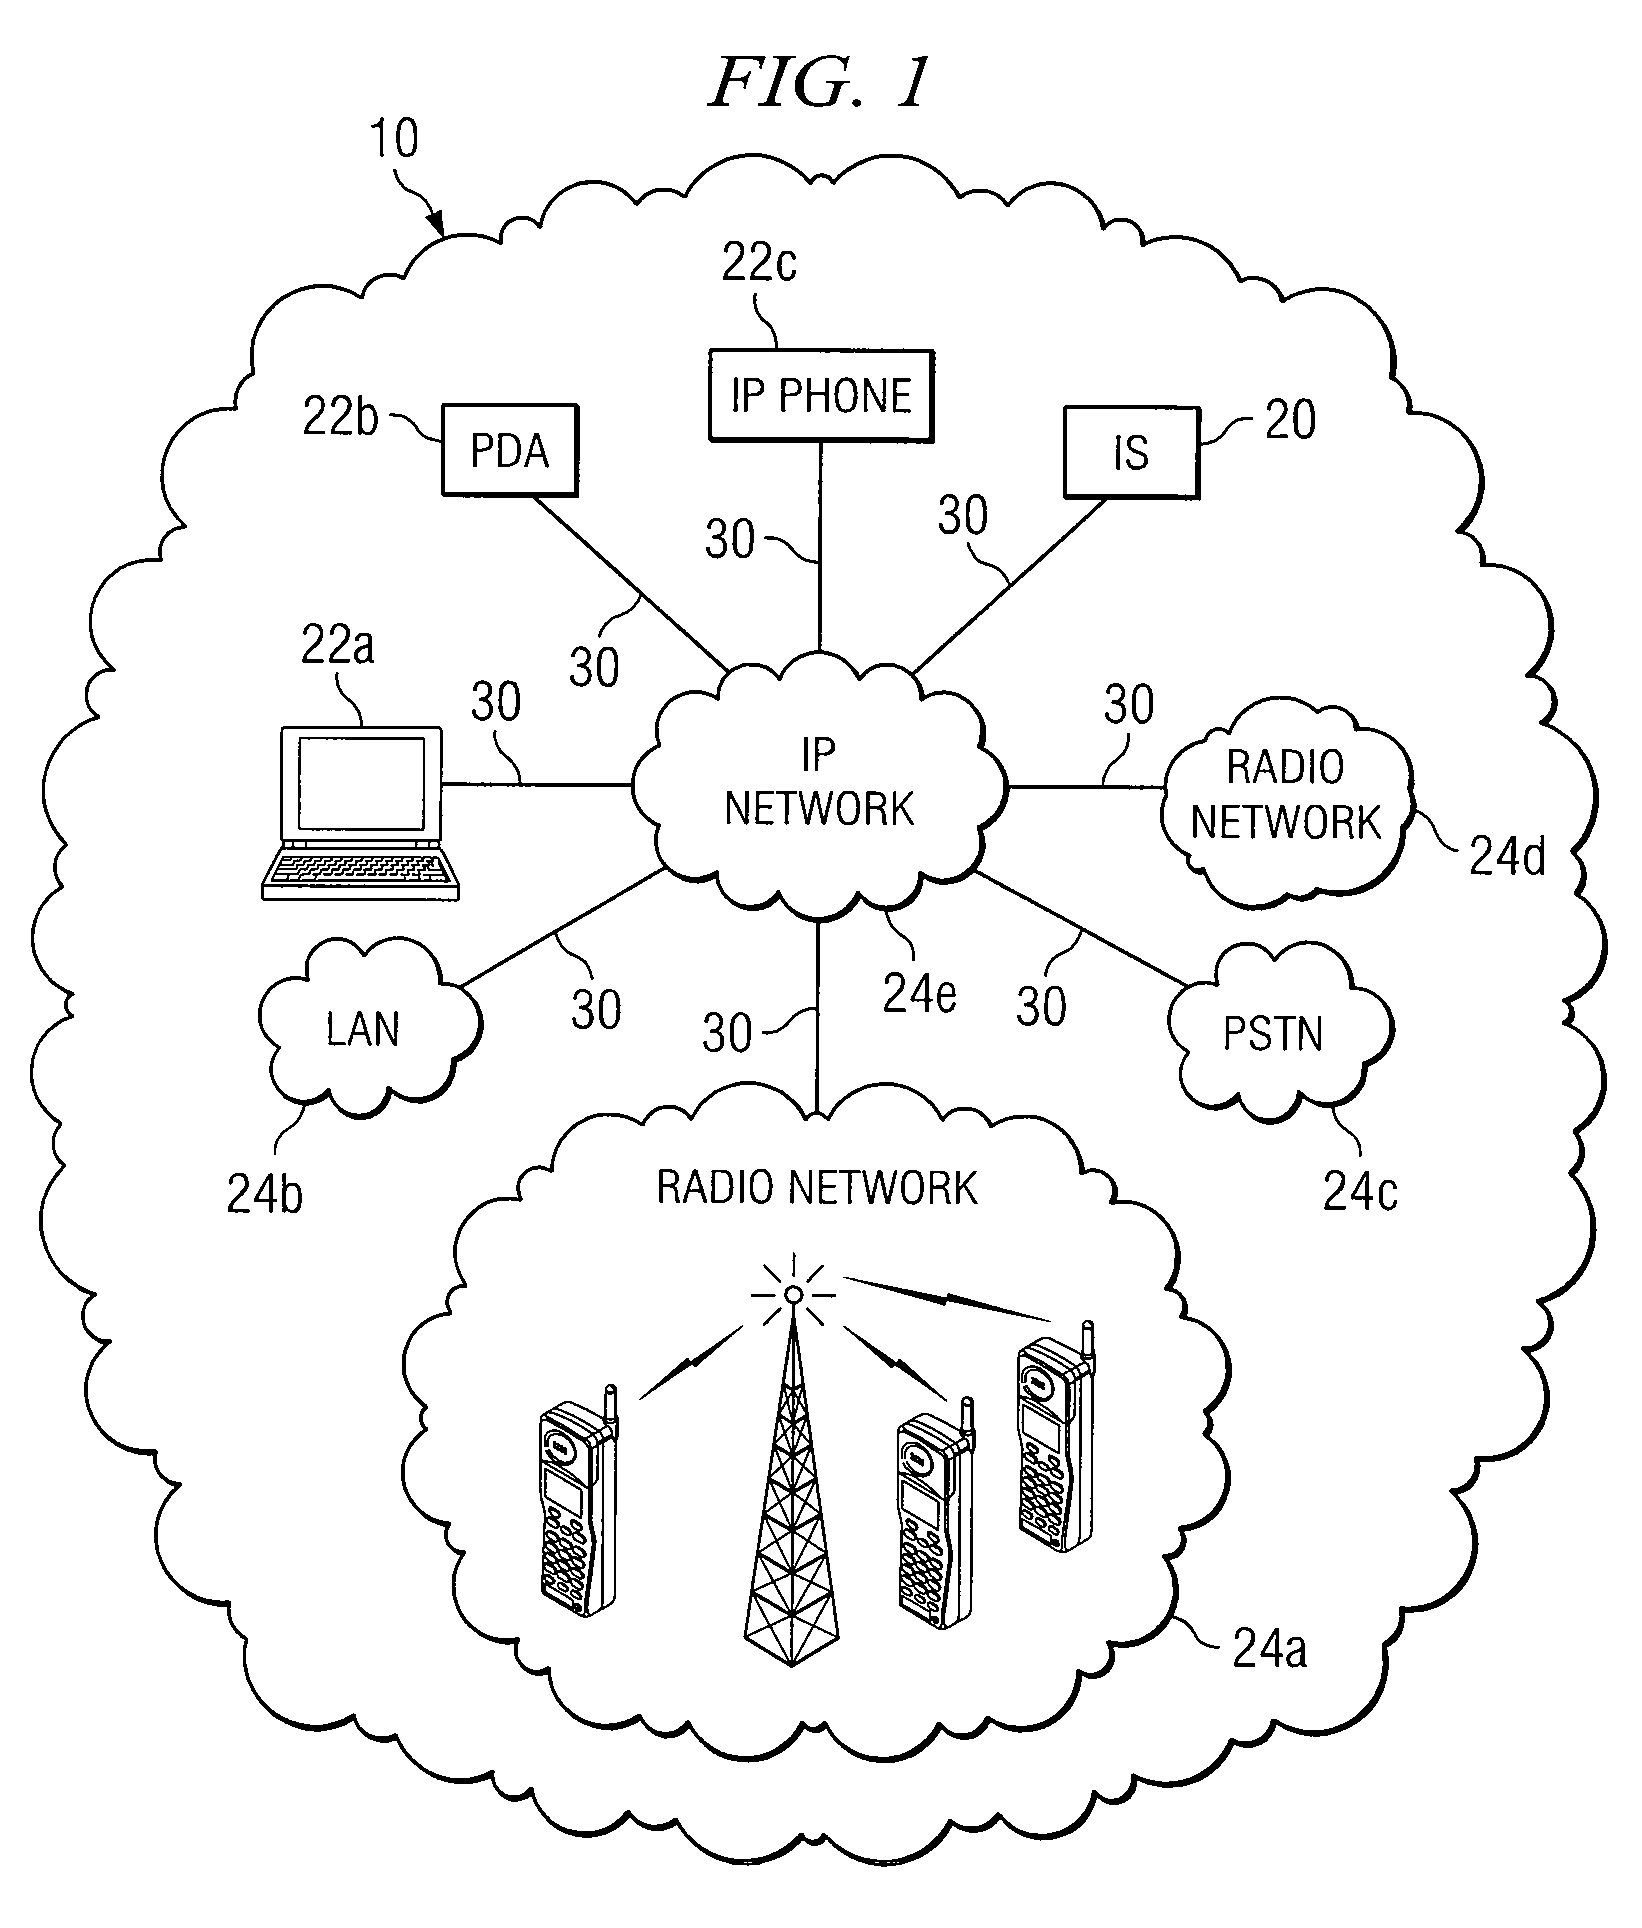 Method and System for Joining a virtual talk group